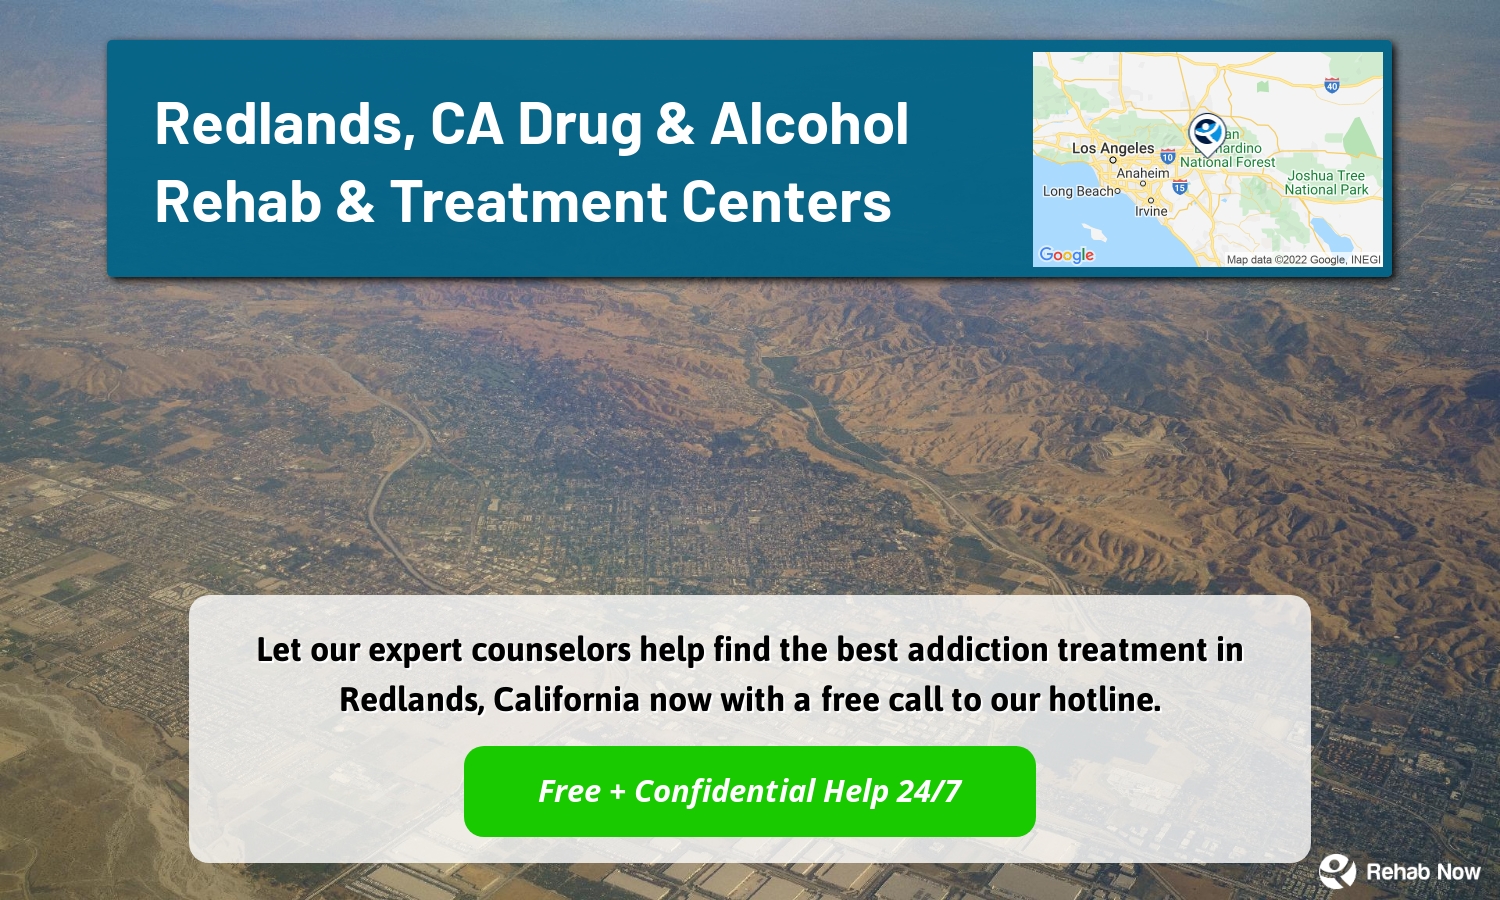 Let our expert counselors help find the best addiction treatment in Redlands, California now with a free call to our hotline.